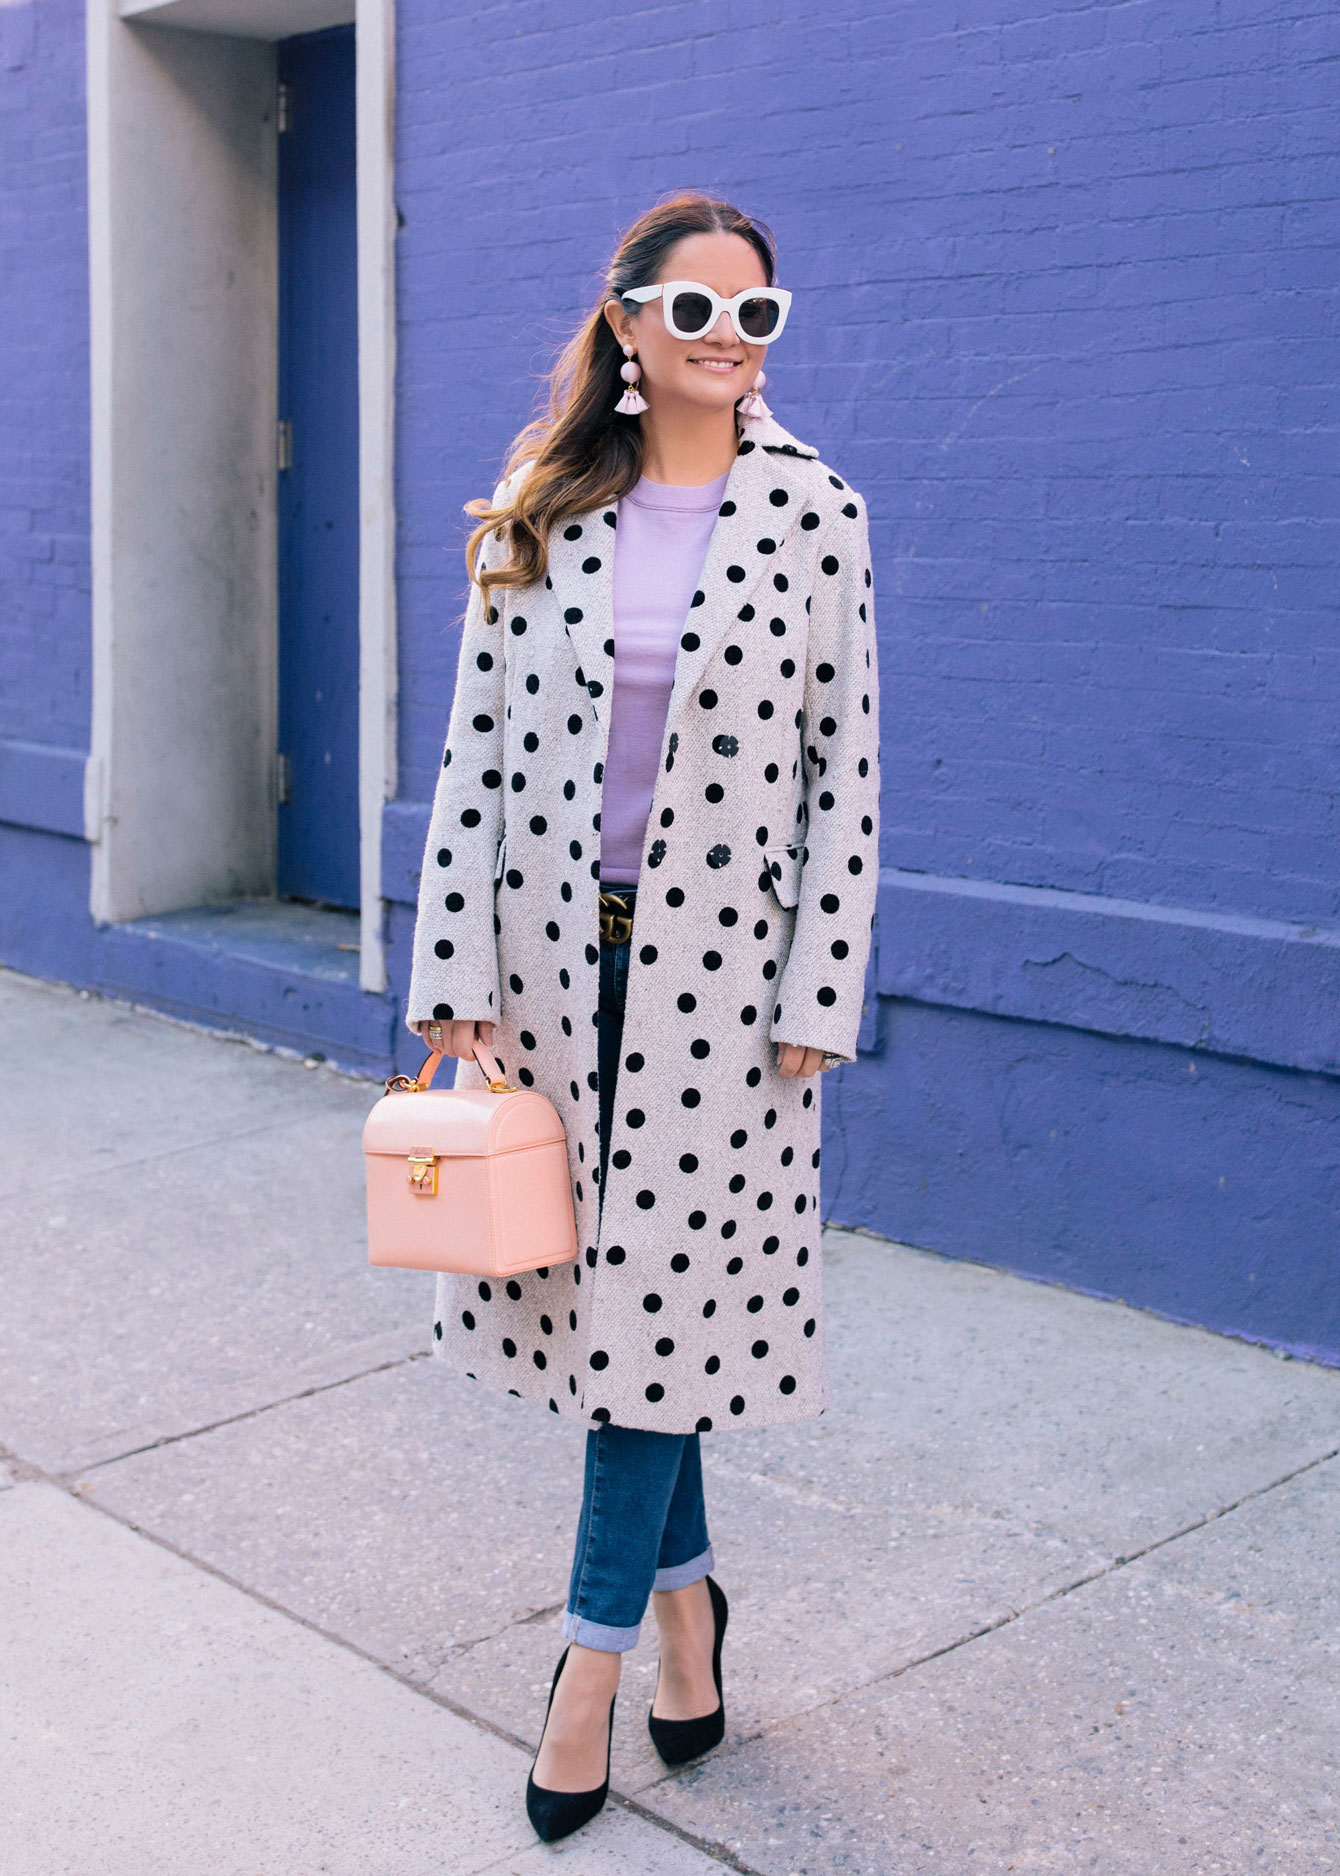 Styling a Polka Dot Coat with Pastels | Style Charade